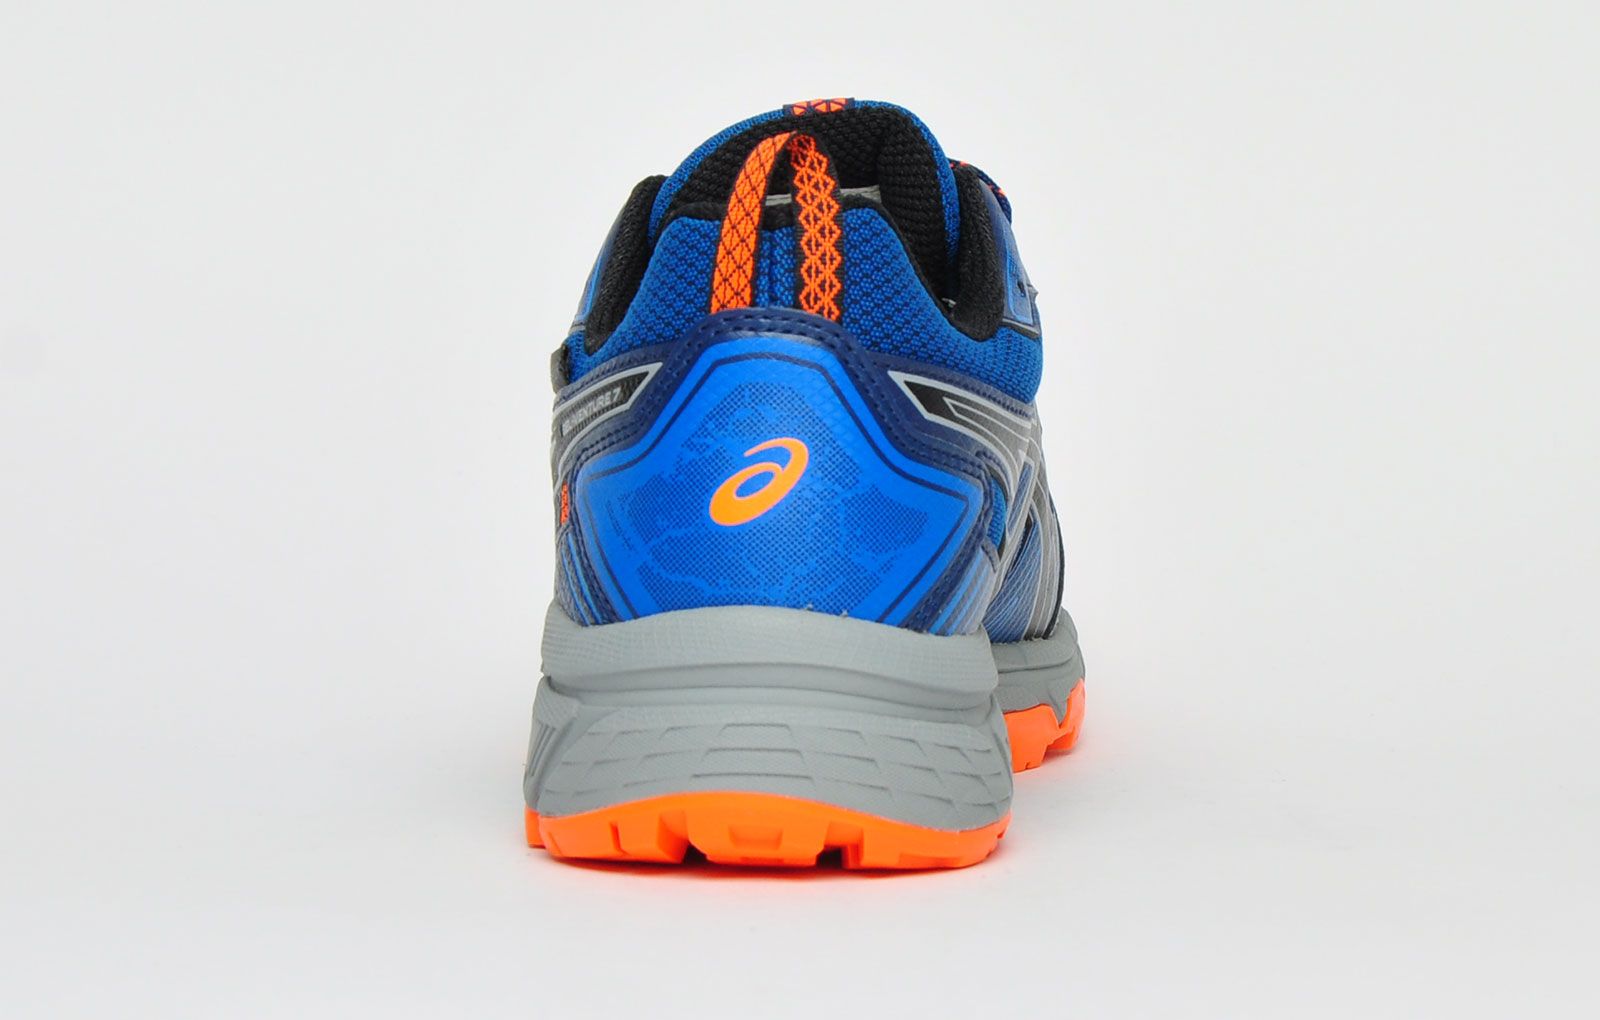 <p>These Asics Gel Venture 7 men’s all-terrain waterproof running shoes will provide excellent support and traction no matter what comes your way. Featuring a practical lugged outsole that offers grip on uphill and downhill conditions. <br></p><p>Whether you’re a beginner or professional, these all terrain running shoes are perfect for you! Engineered from a fusion of textile mesh and synthetic materials, these Asics Gel Venture 7 men’s all-terrain running shoes feature a practical lightweight design with maximum performance capabilities, the Asics Venture 7 is a must have on and off-road shoe that will keep your feet dry and deliver a supportive comfortable ride wherever you go</p><p><br></p> <p> - Textile mesh upper construction enhances breathability </p> <p>- Supportive synthetic overlays deliver the perfect fit</p> <p> - Stitched Toe Bumper delivers extra protection against trail hazards</p> <p> - Padded inner delivers super comfy wear</p> <p> - Waterproof construction </p> <p>- Reaarfoot Gel cushioning system delivers shock resistance</p> <p> - Trustic system reduces weight whilst upkeeping the support </p> <p>- Asics Branding throughout</p>